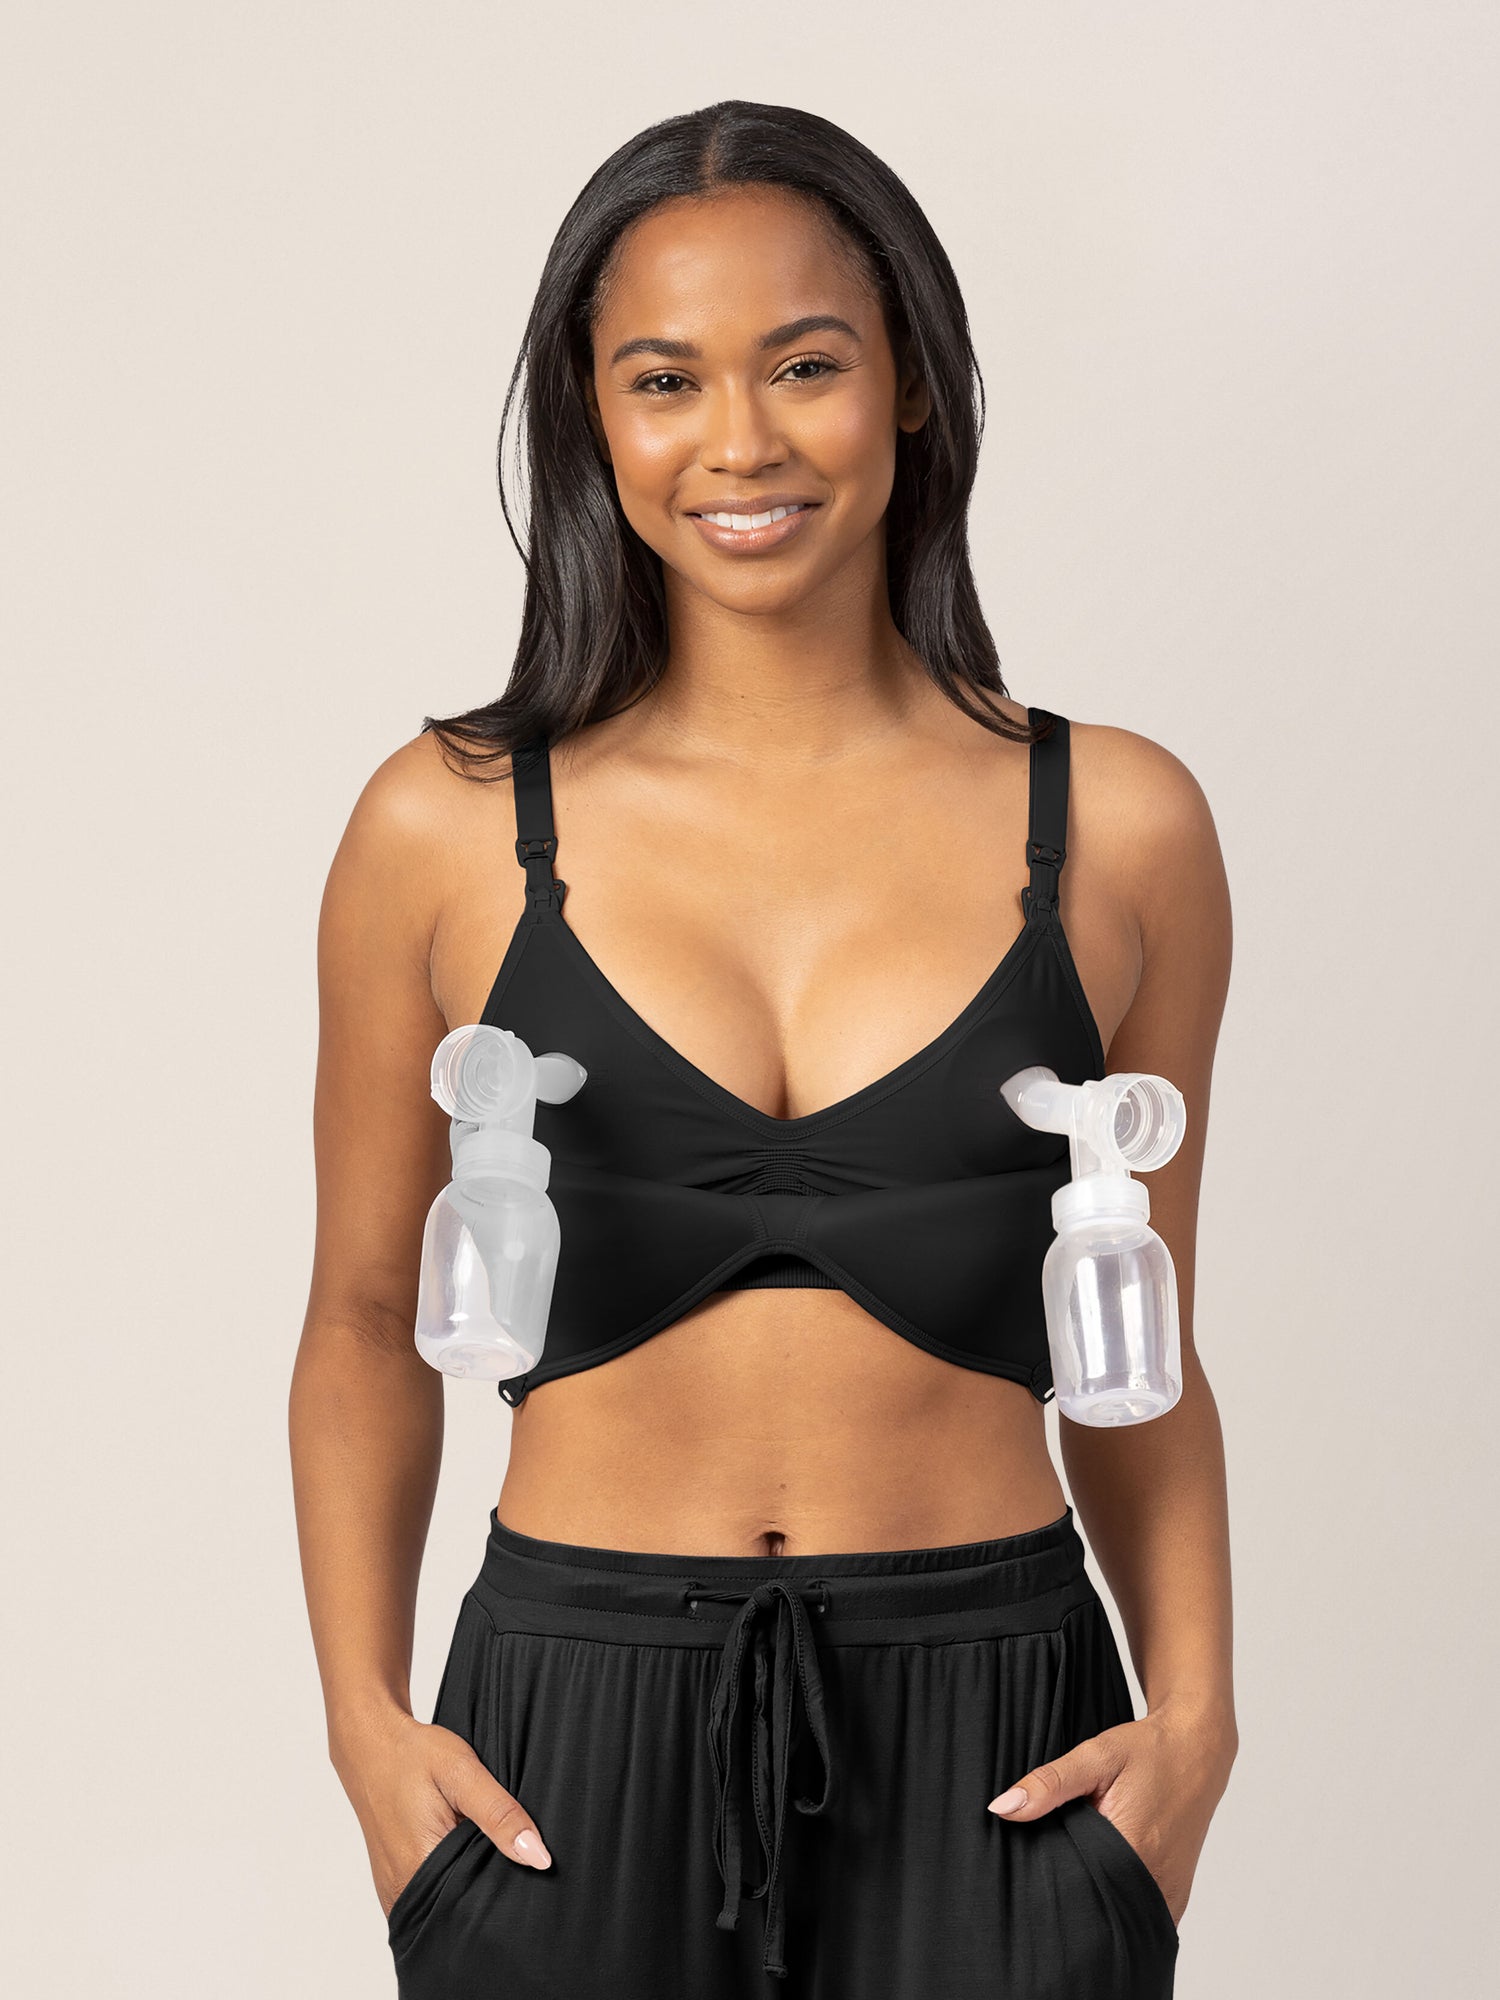 Model hooked up to two breast pumps while wearing the Signature Sublime® Contour Maternity & Nursing Bra in Black